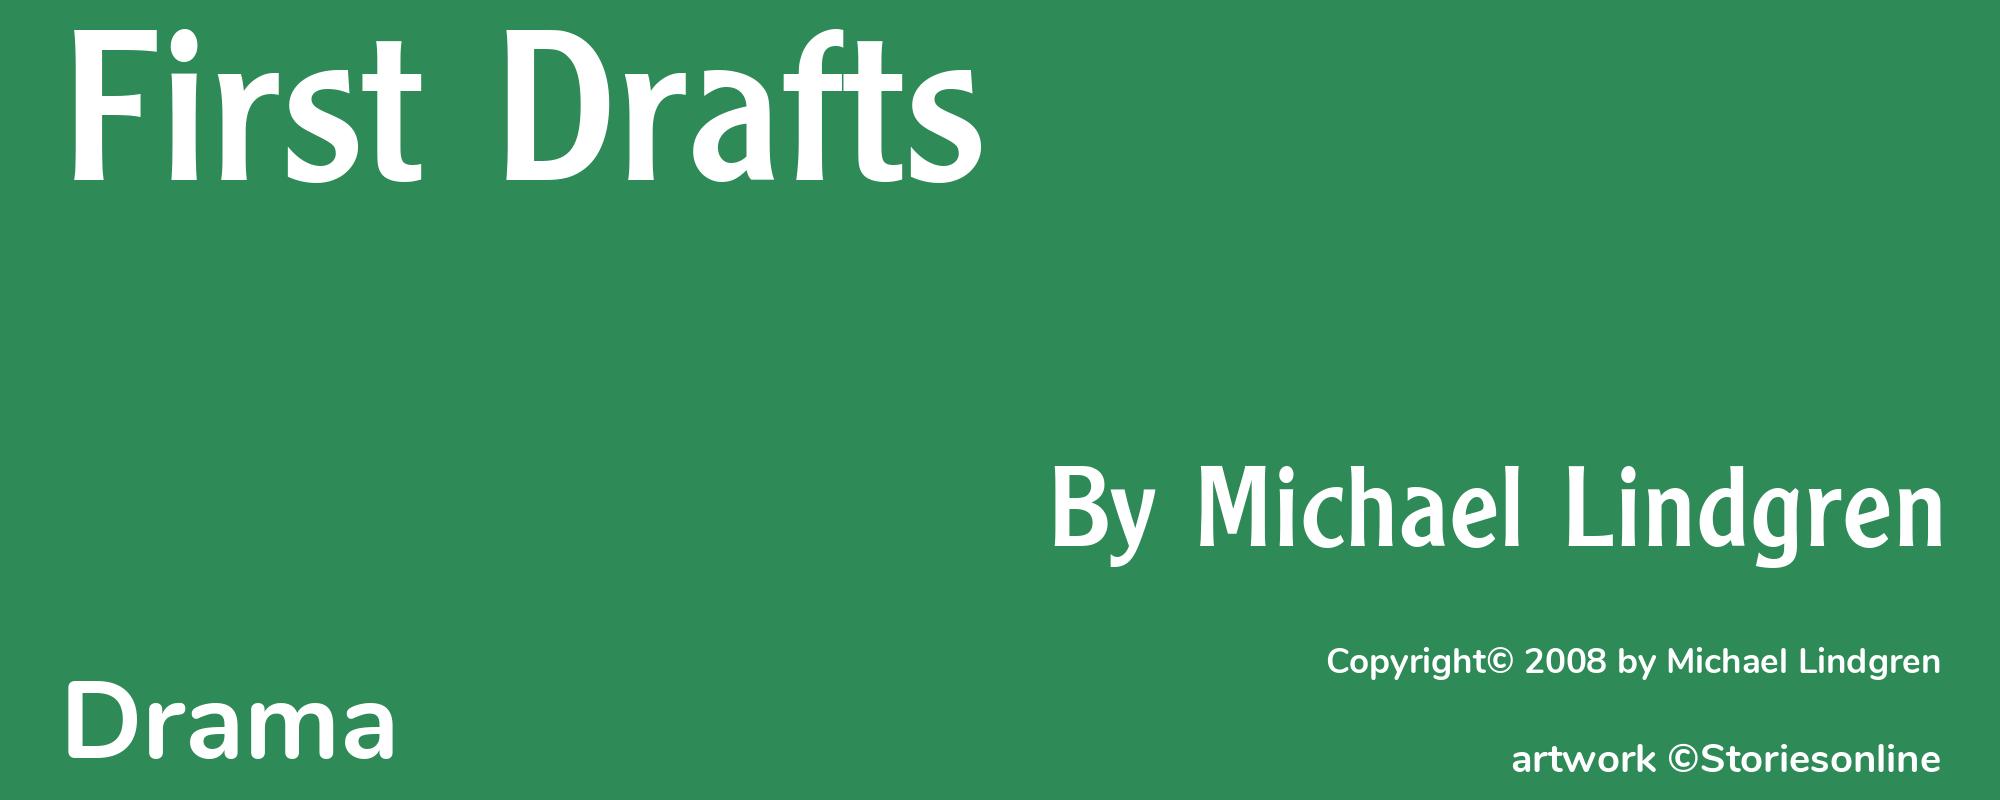 First Drafts - Cover